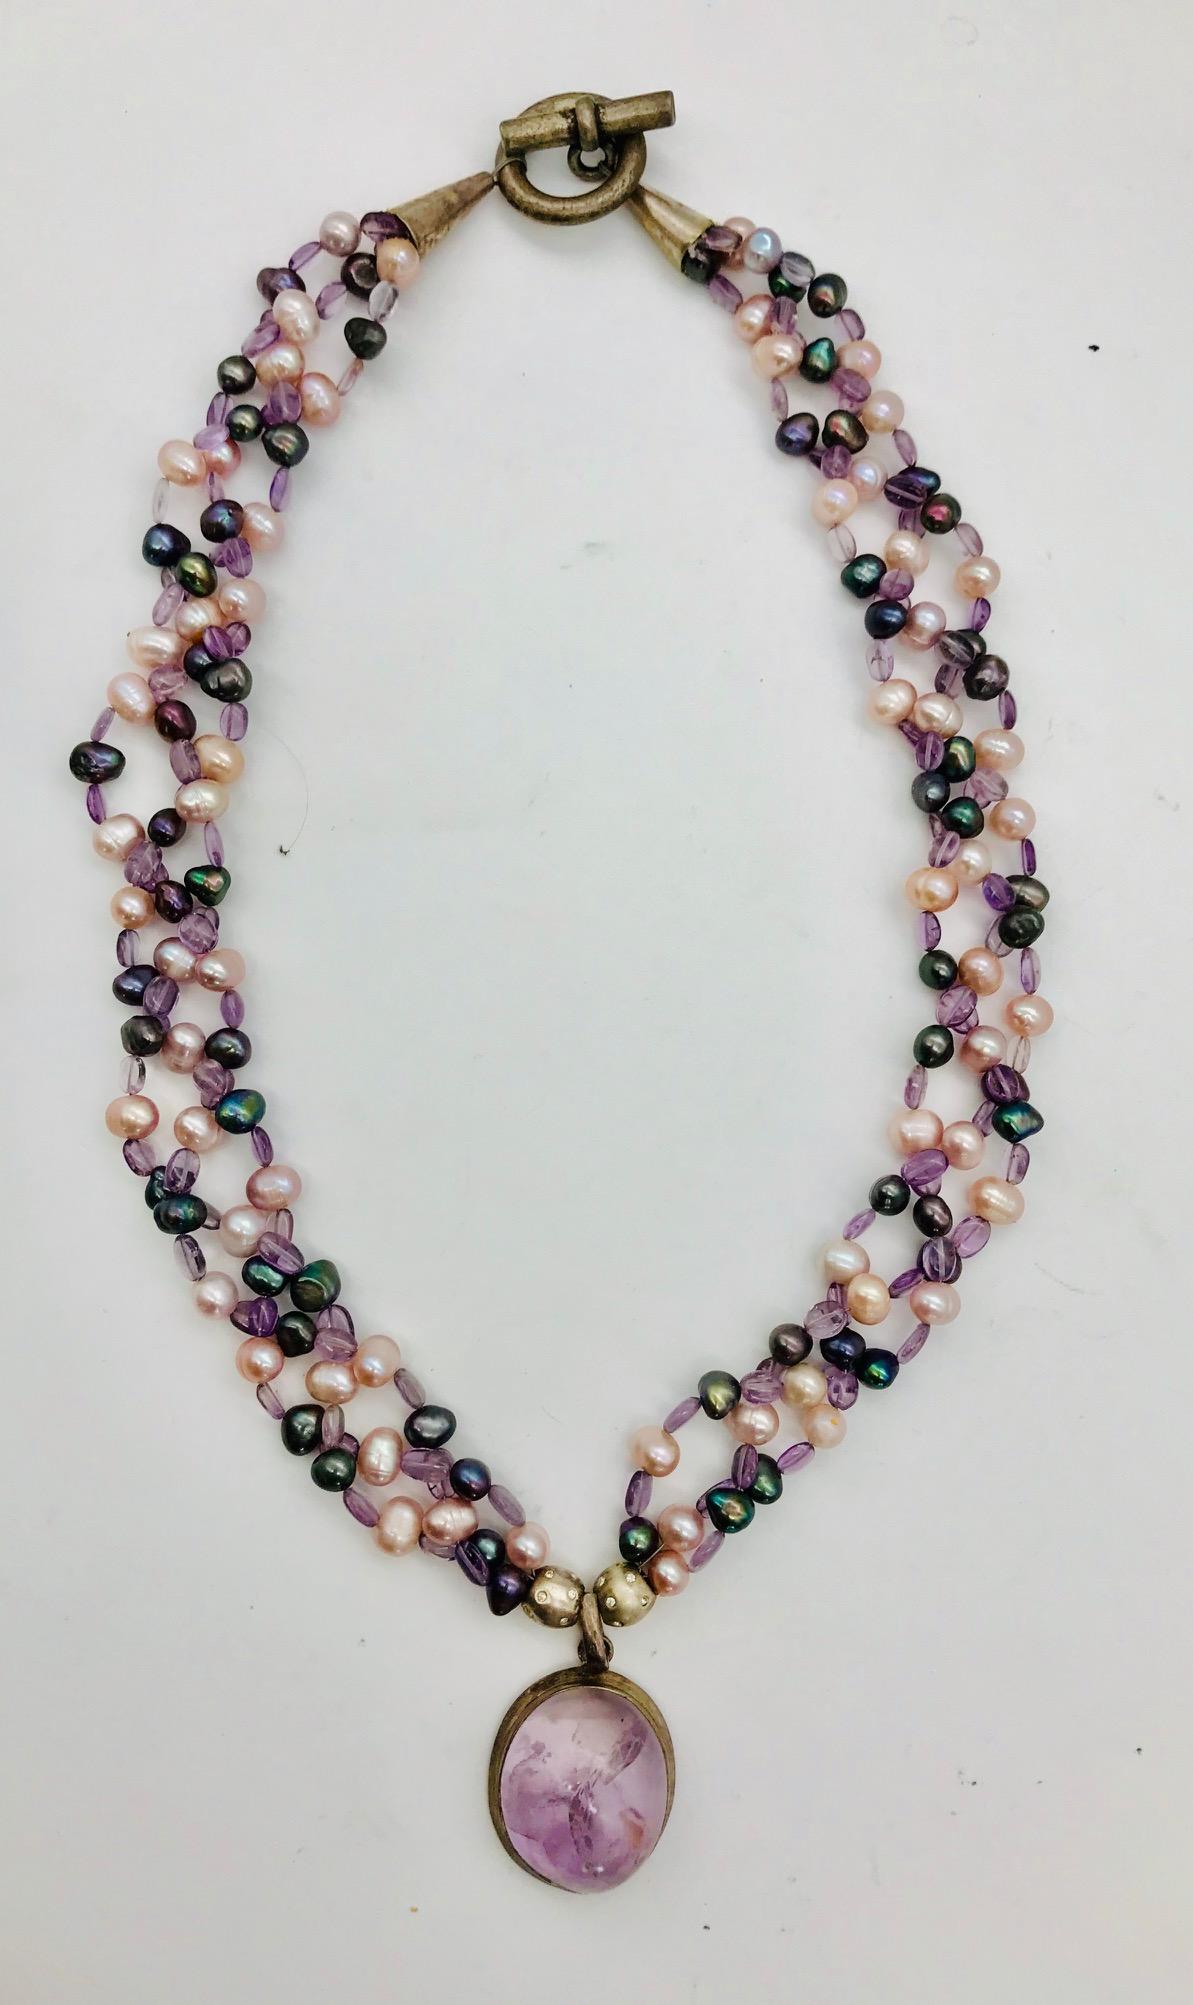 Amethyst Pendant and Beads with pink and black pearls in 3 strand braided Necklace with a large Amethyst Pendant., and silver plated clasp.
 Pearls are the only gems created by an oyster – a living organism. Today, most pearls are grown on